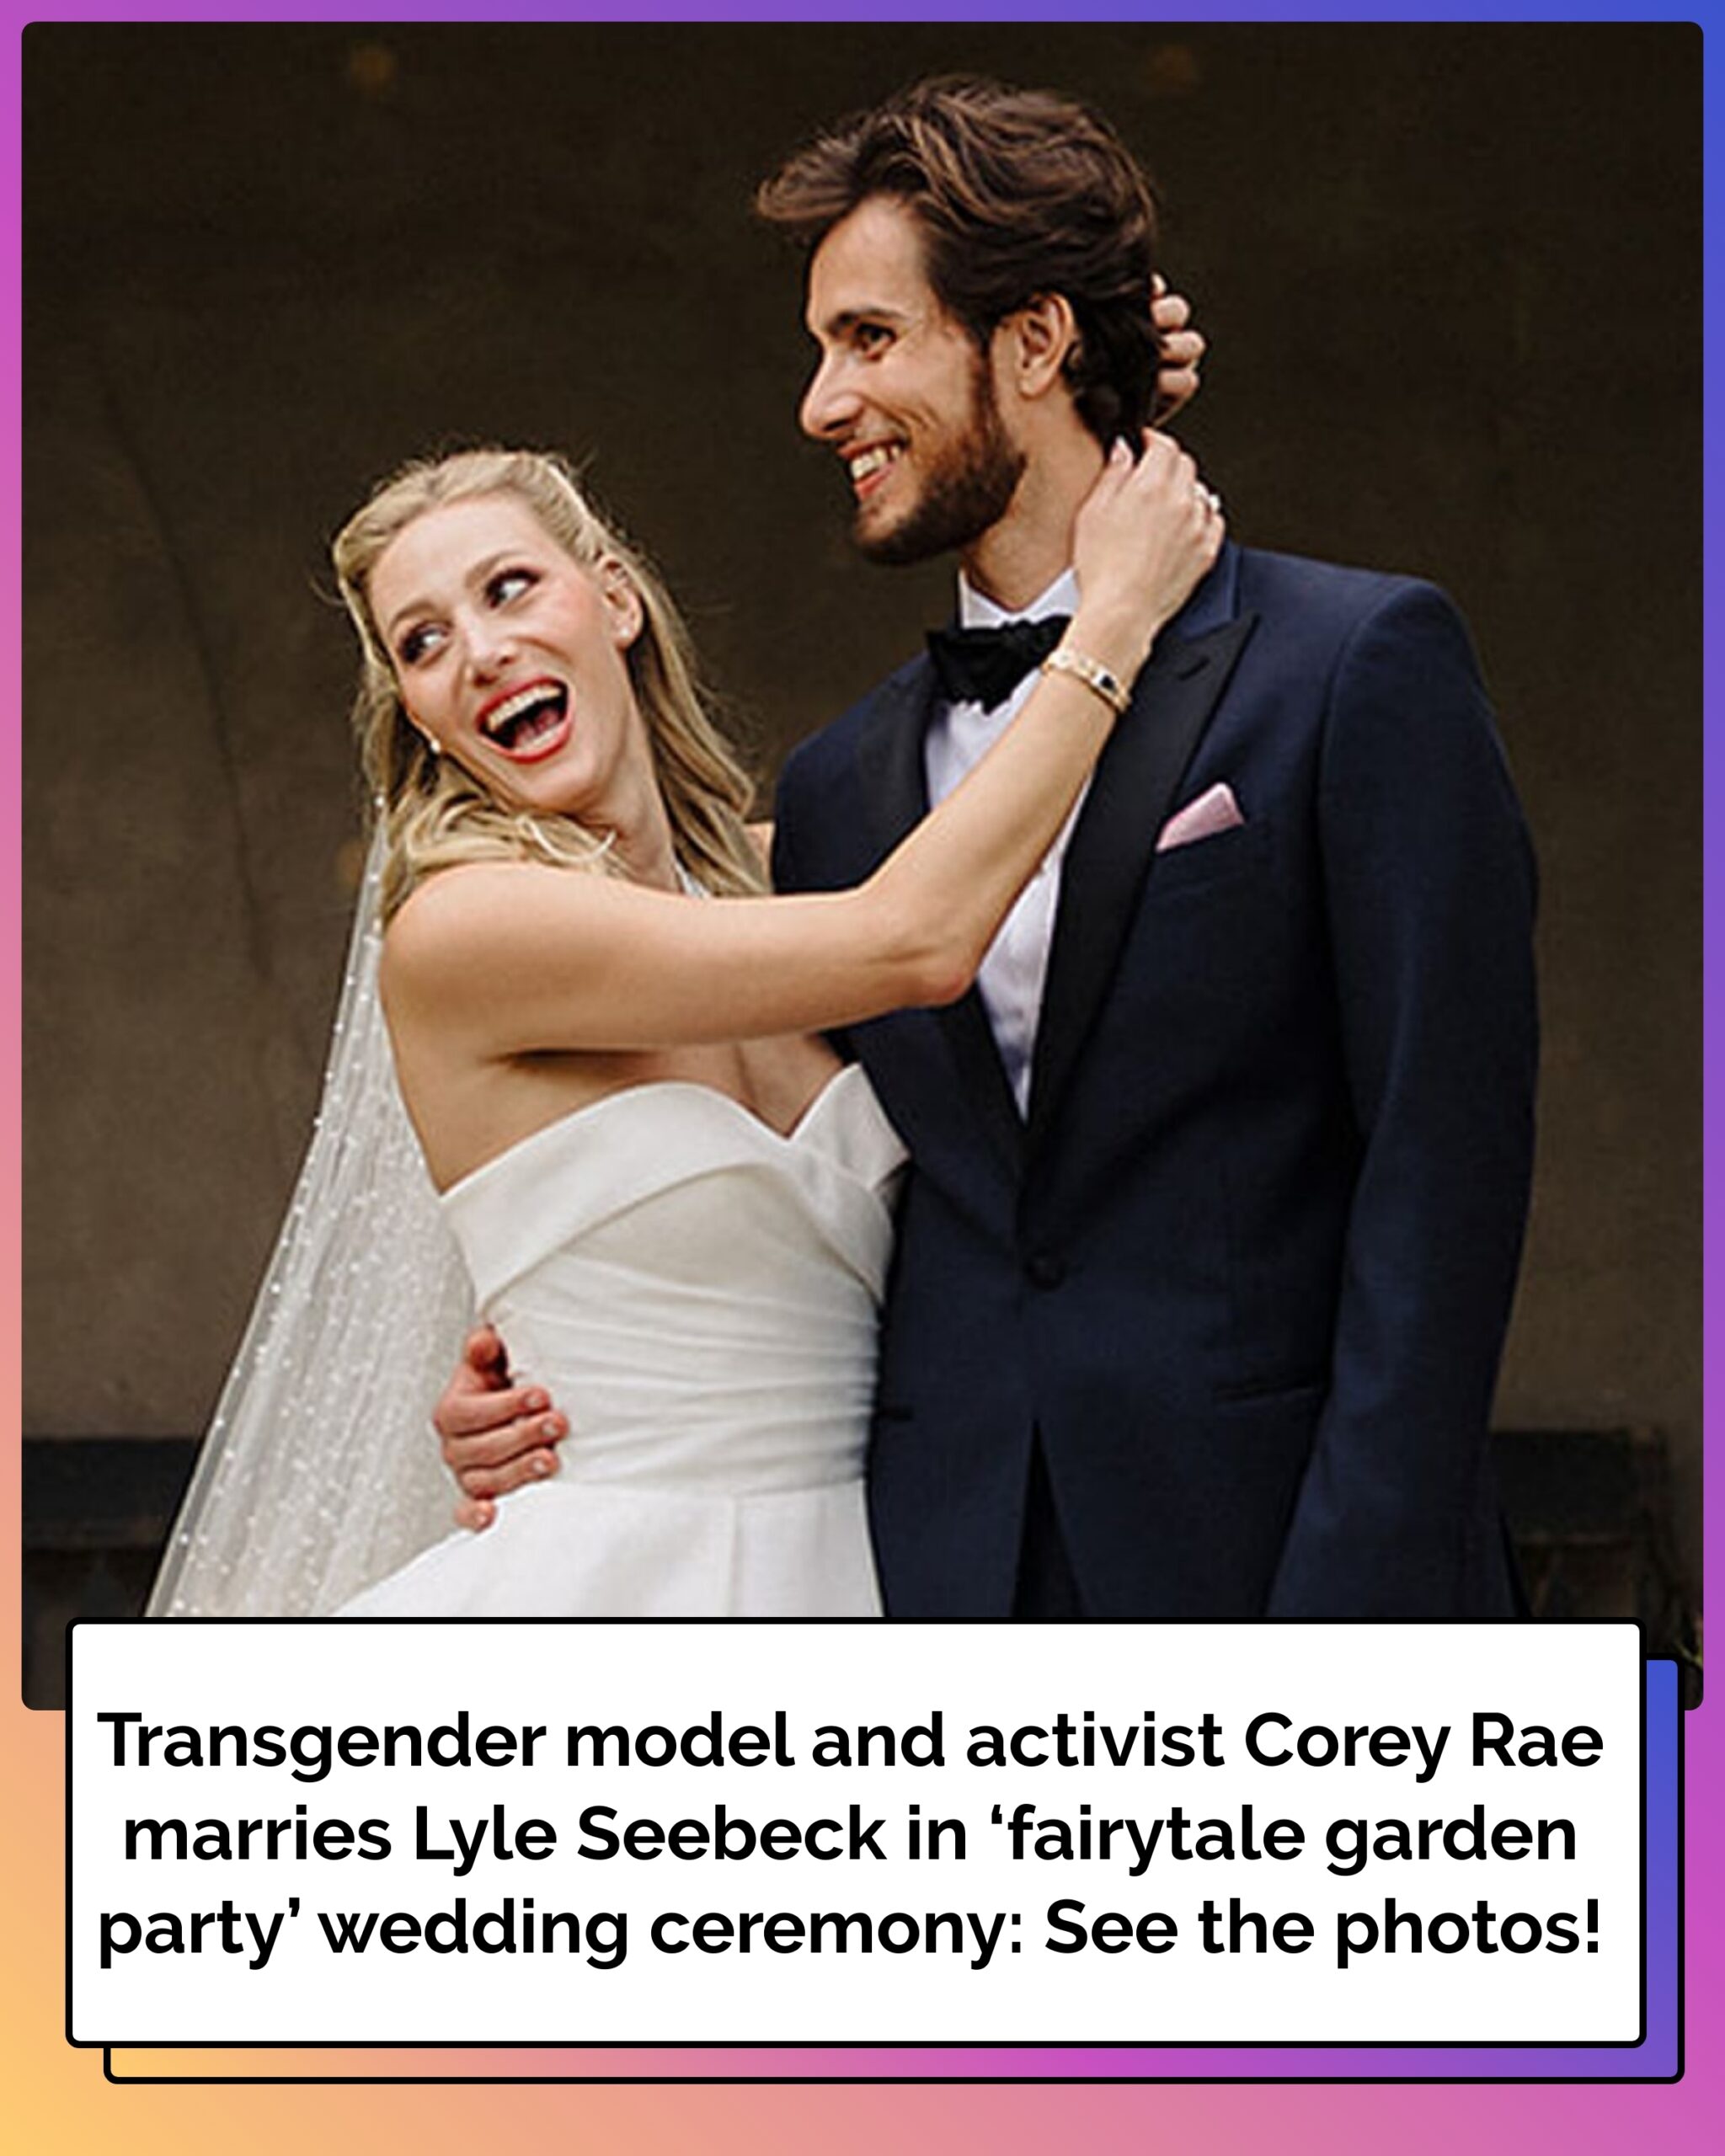 Transgender Activist Corey Rae Marries Lyle Seebeck in ‘Fairytale Garden Party’ Wedding Ceremony: See the Photos!